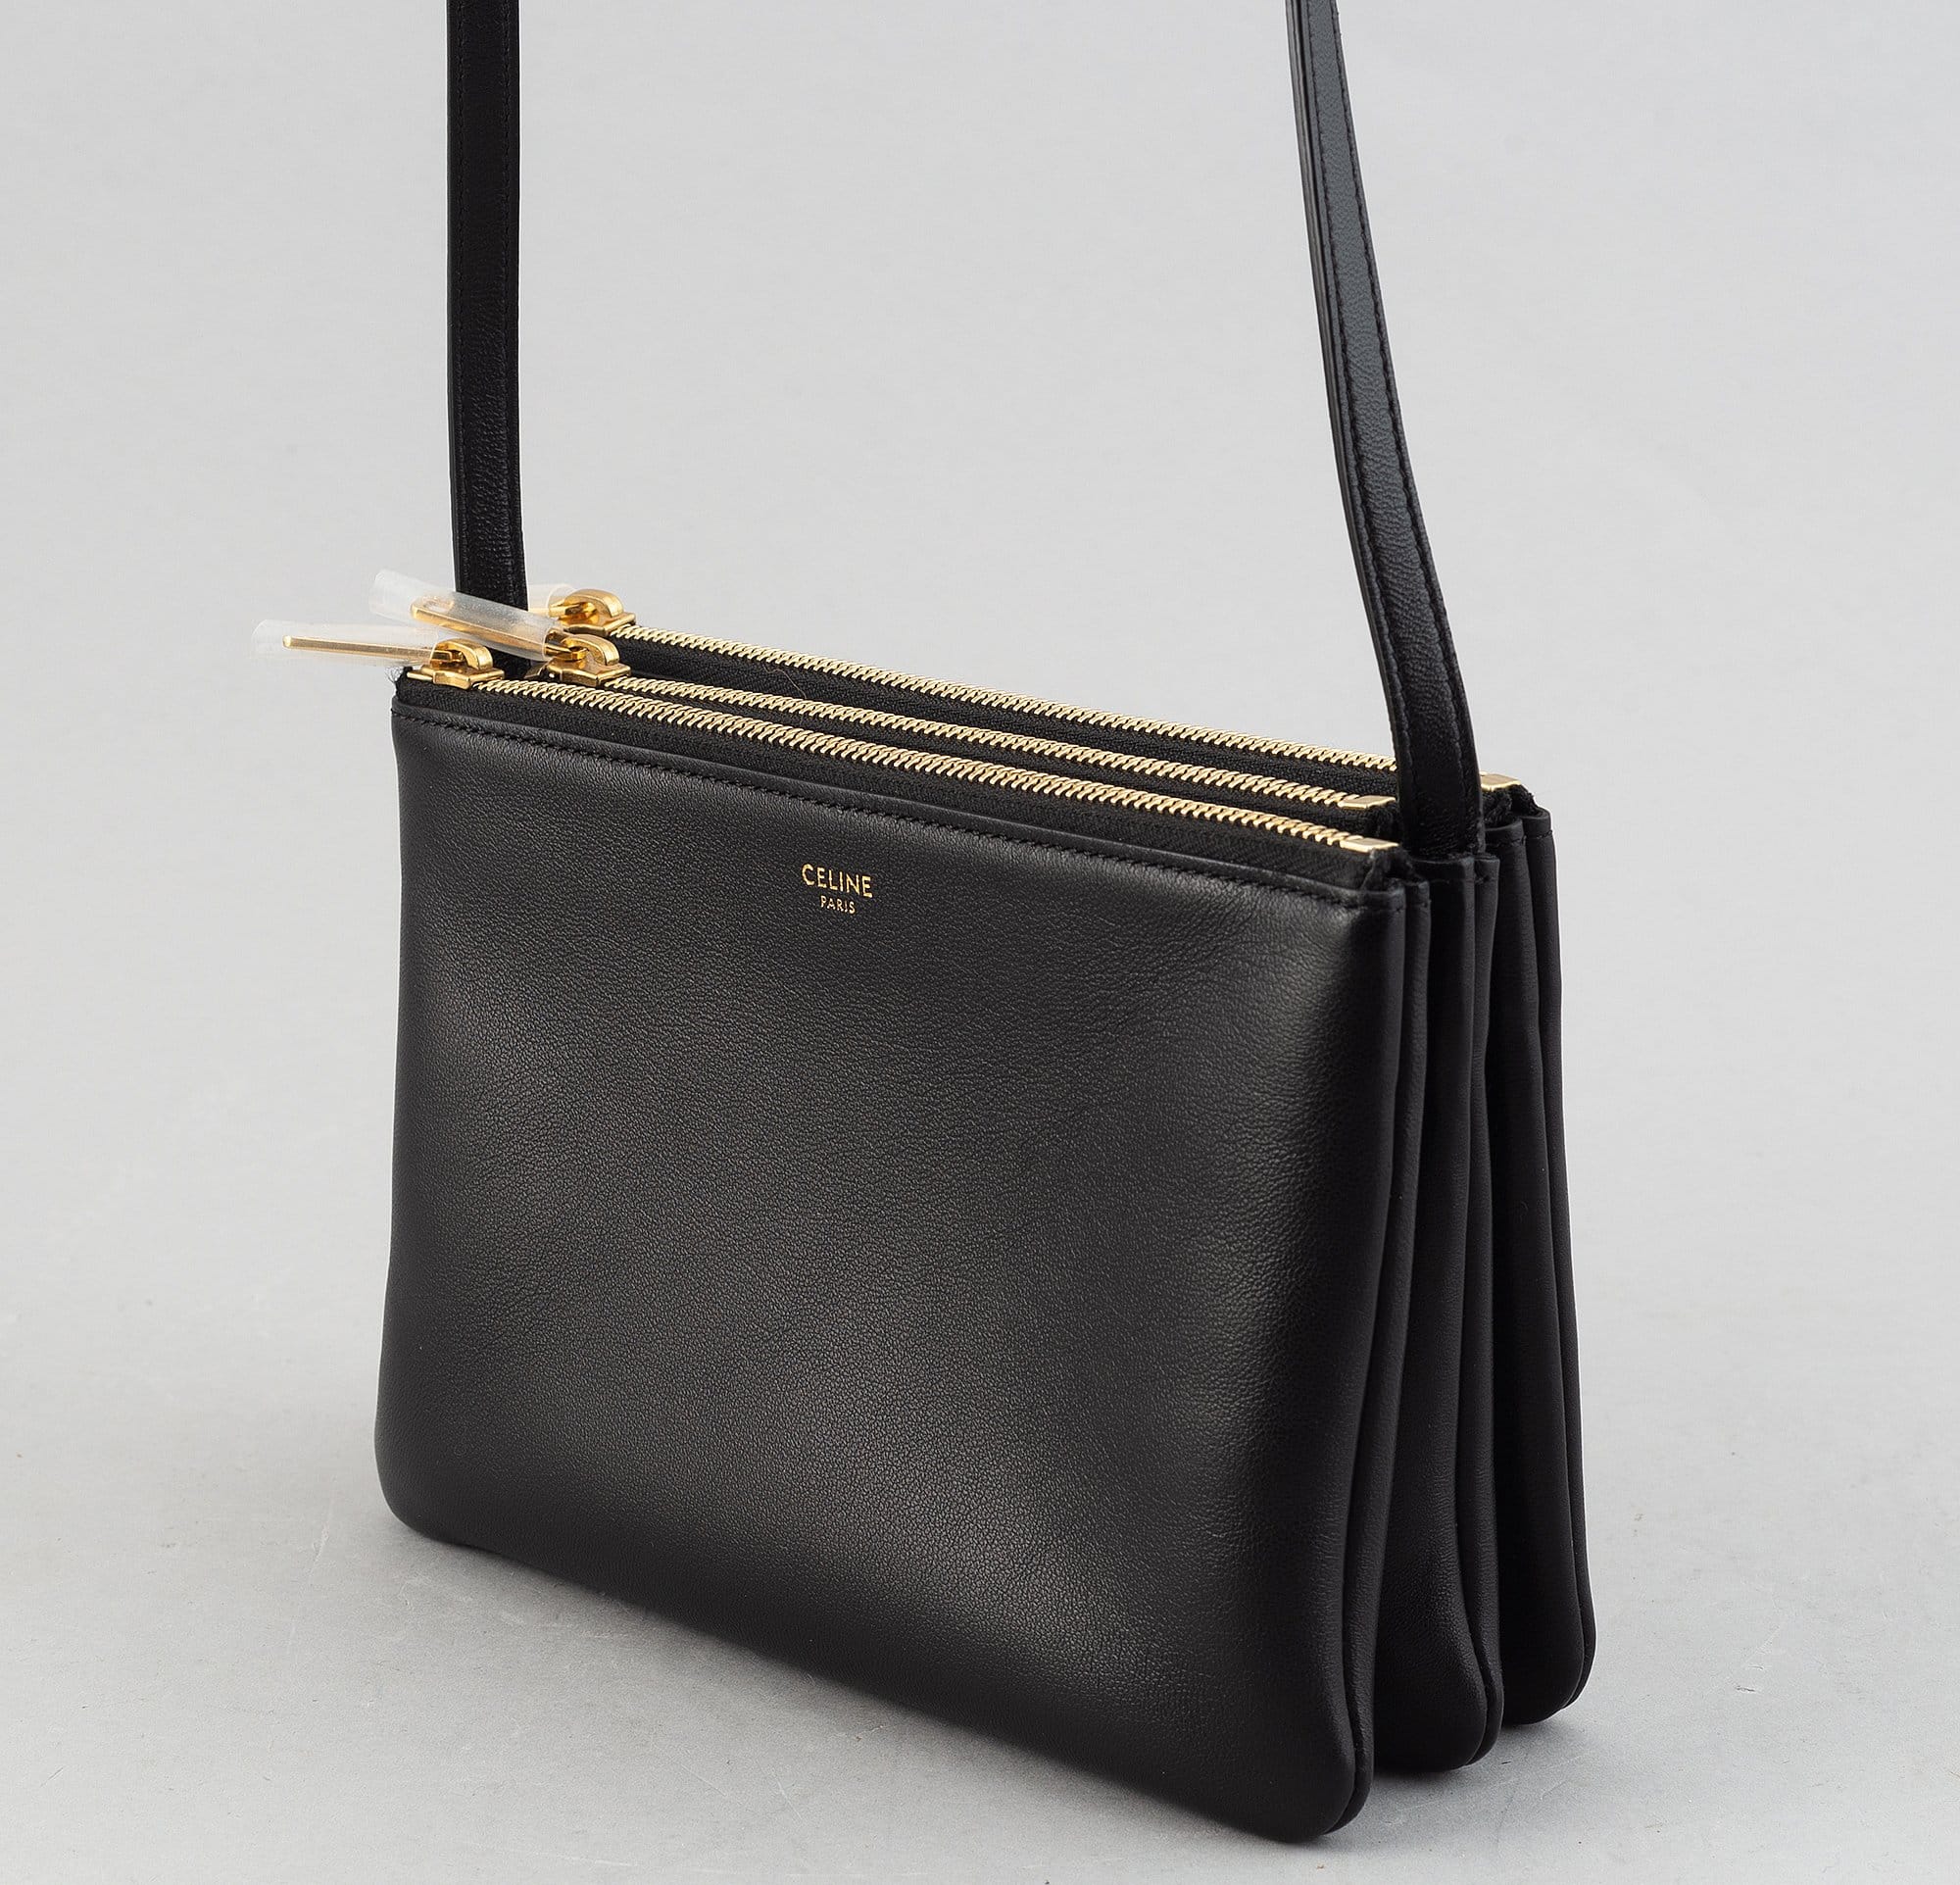 Although this has now been discontinued, the Celine Trio remains popular for its understated, timeless appeal